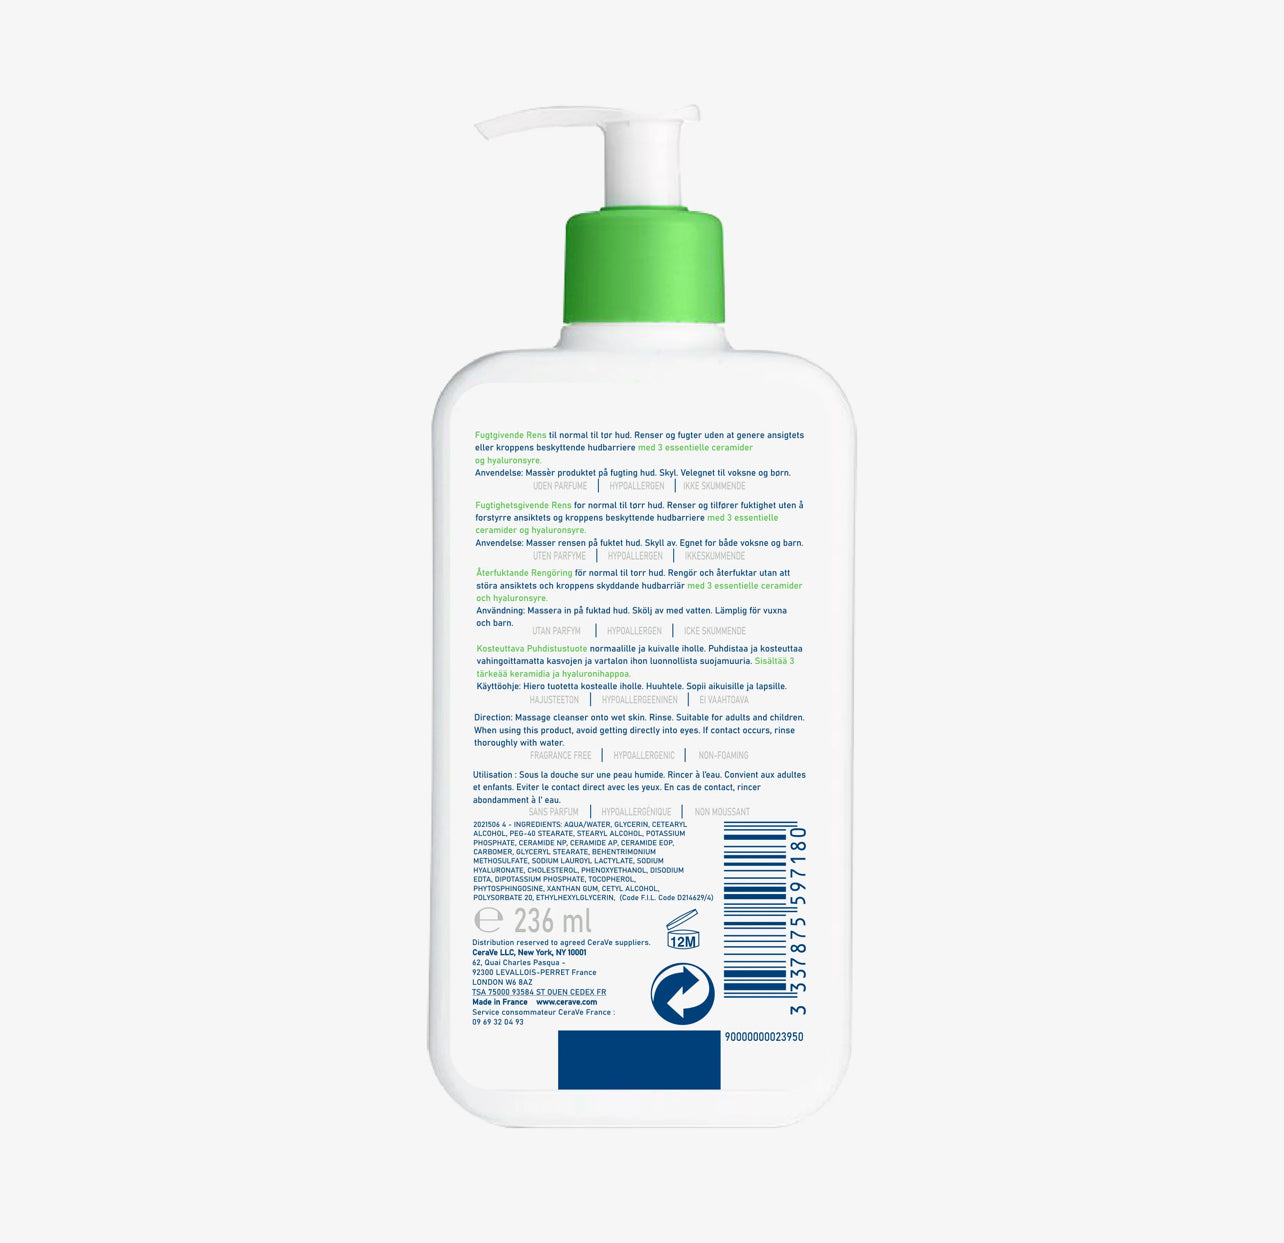 CeraVe Hydrating Cleanser 236ML